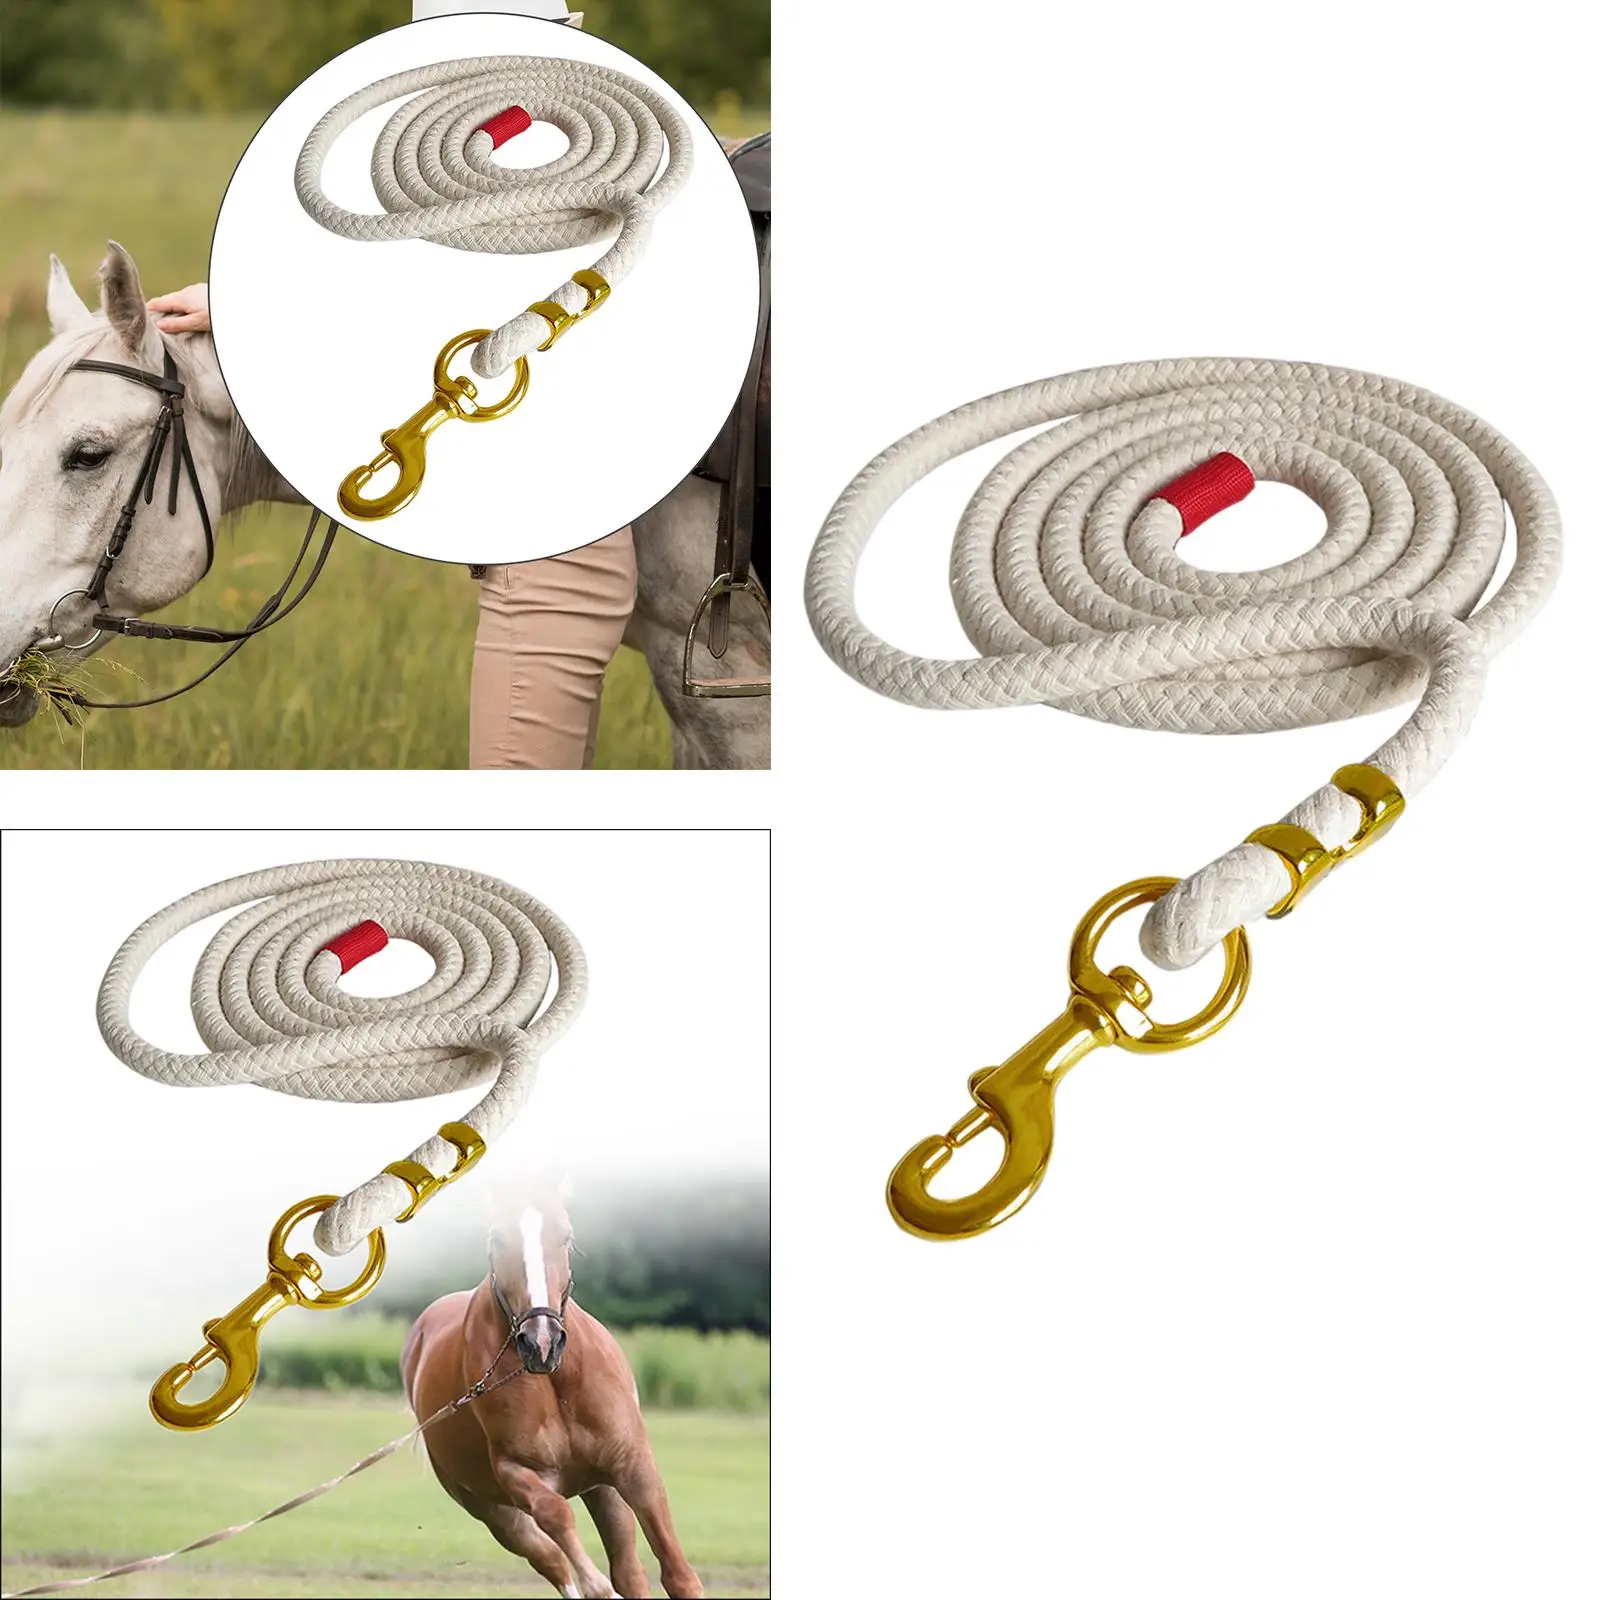 Horse Lead Rope for Leading Training Horse, Dog, or Sheep Heavy Duty Attaches to Halter or Harness Webbing Equestrian Lead Rope